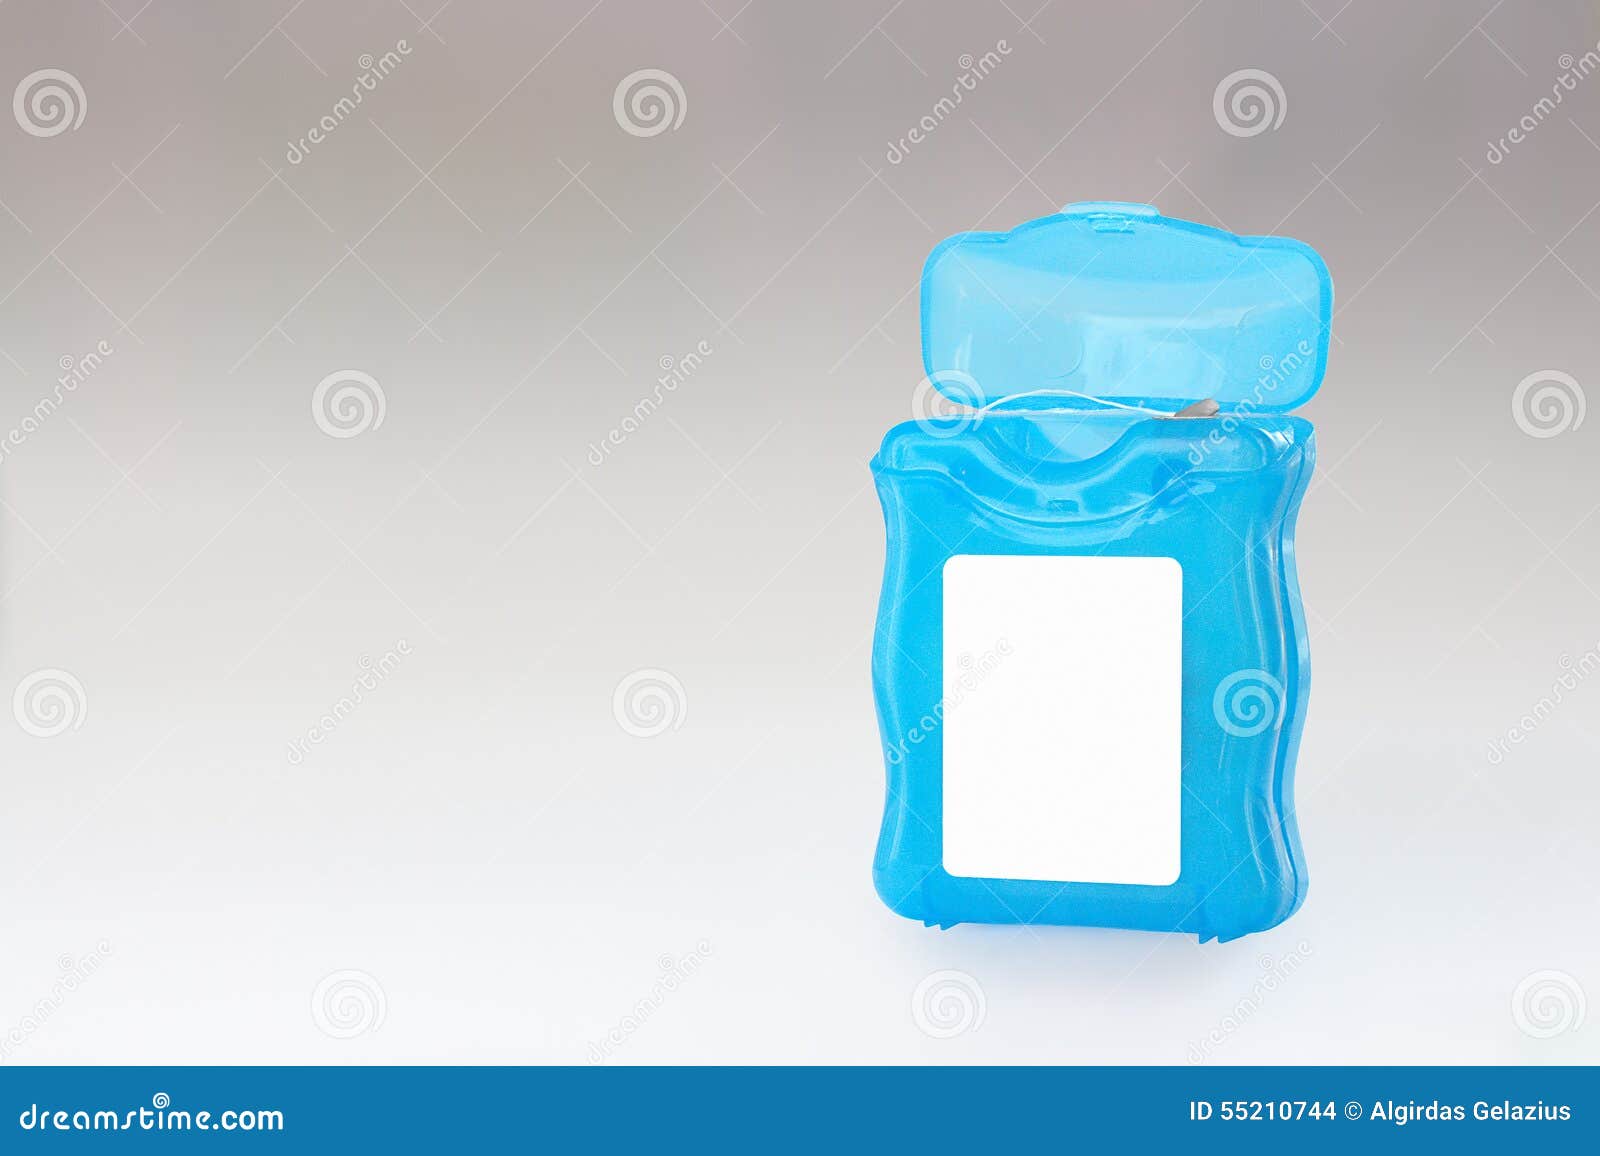 Dental Tape Dental Floss Container Packaging Stock Photo 628234874